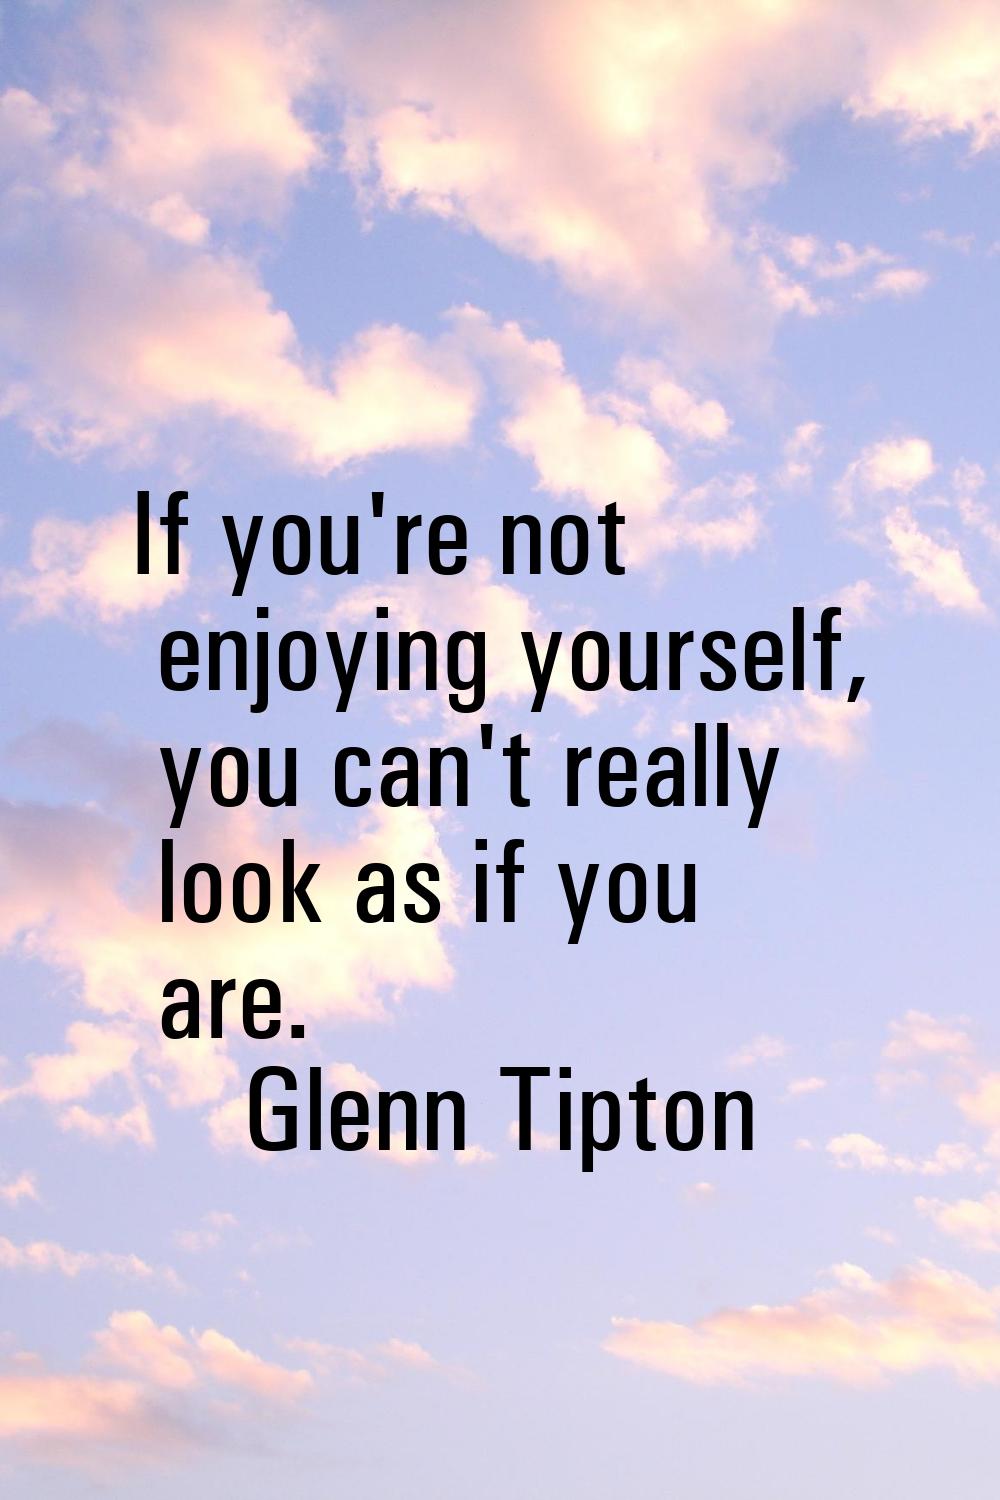 If you're not enjoying yourself, you can't really look as if you are.